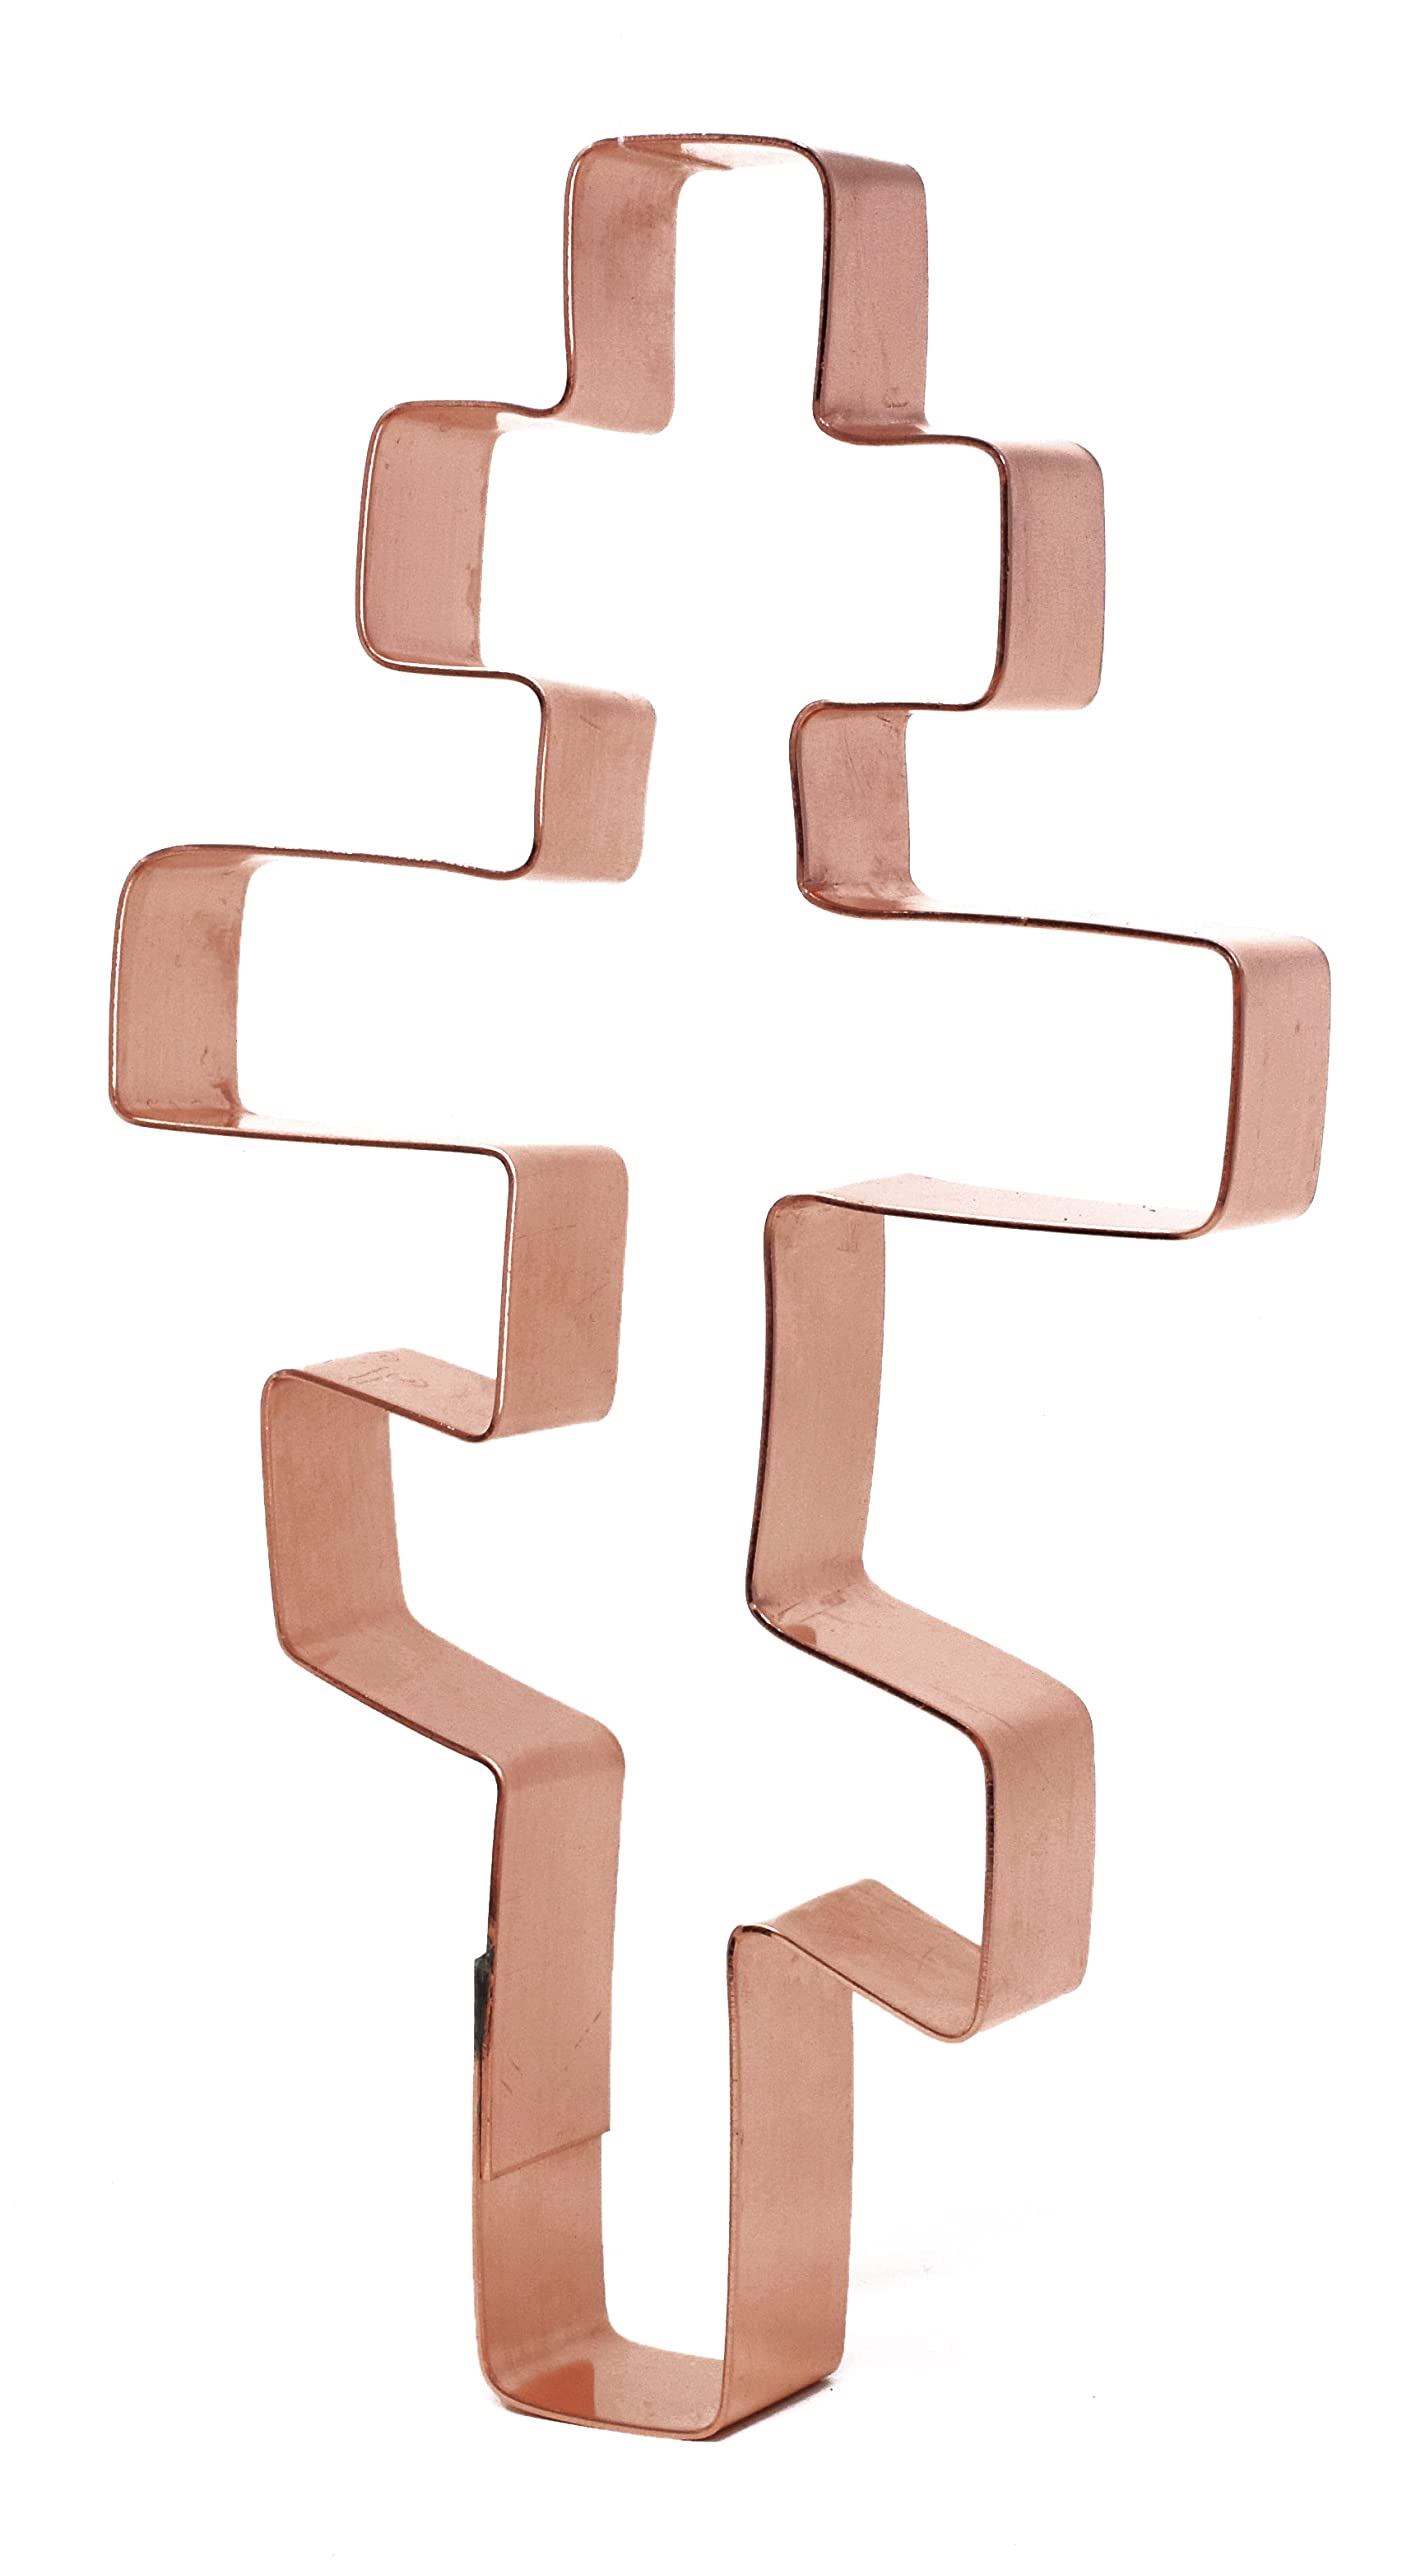 Eastern Orthodox Cross Cookie Cutter 5.5 X 3 inches - Handcrafted Copper Cookie Cutter by The Fussy Pup